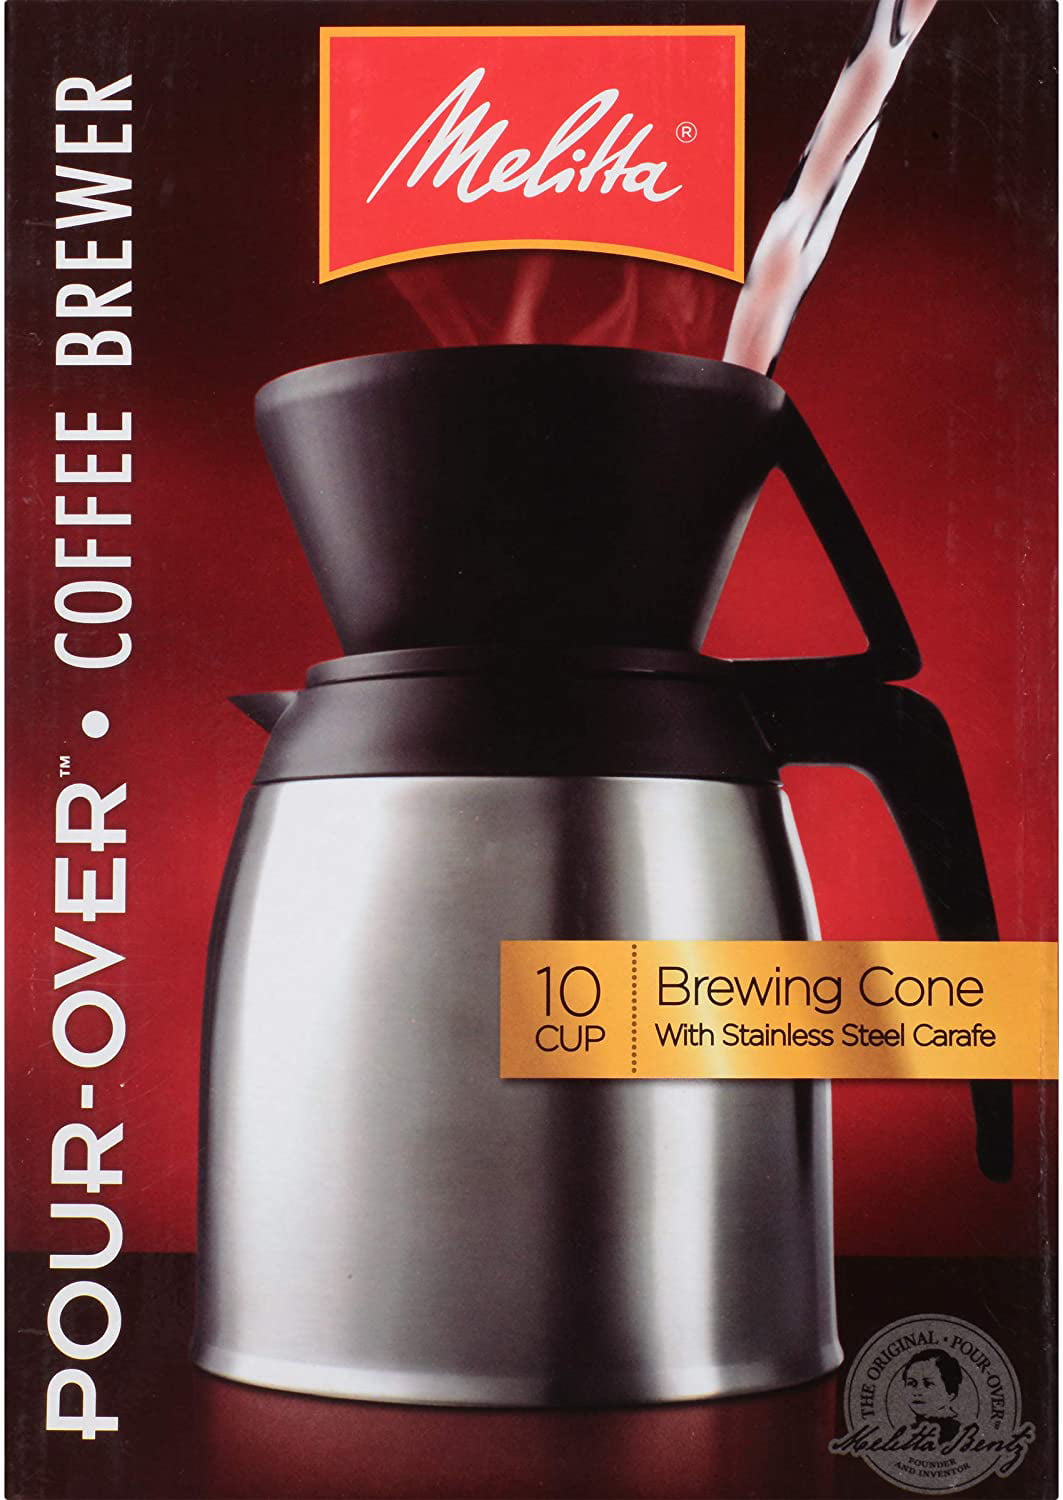 Melitta 220 volts coffee maker with 15 cup Insulated Thermal Carafe Jug  220v 50 hz